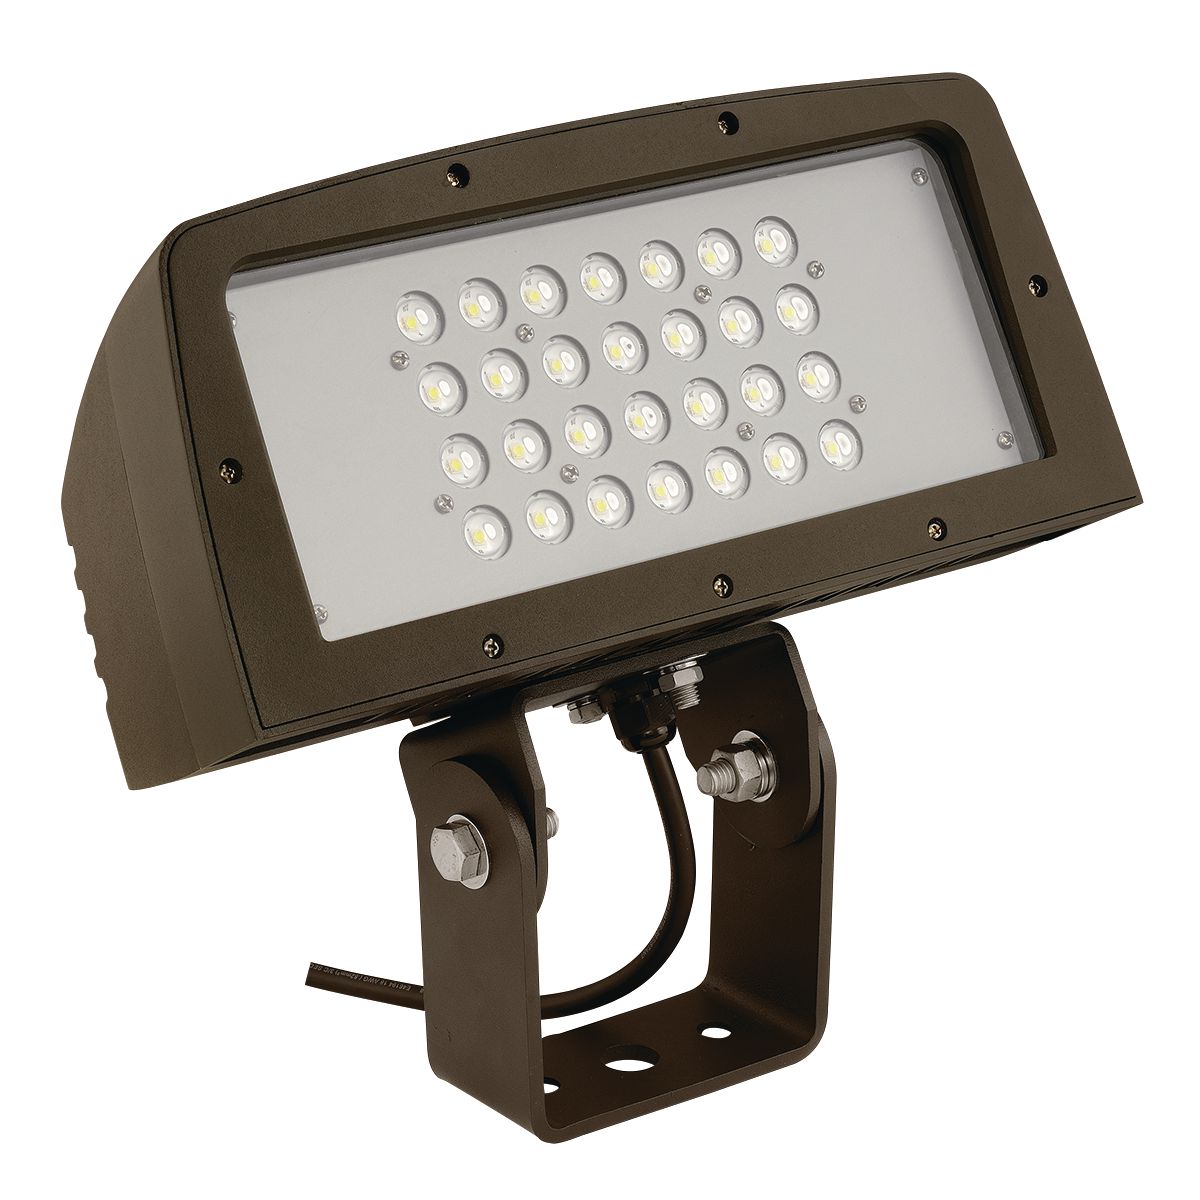 FLL1504KUK - 150W Led FLD 40K KNCK MNT 14665LM - Hubbell Lighting Outdoor